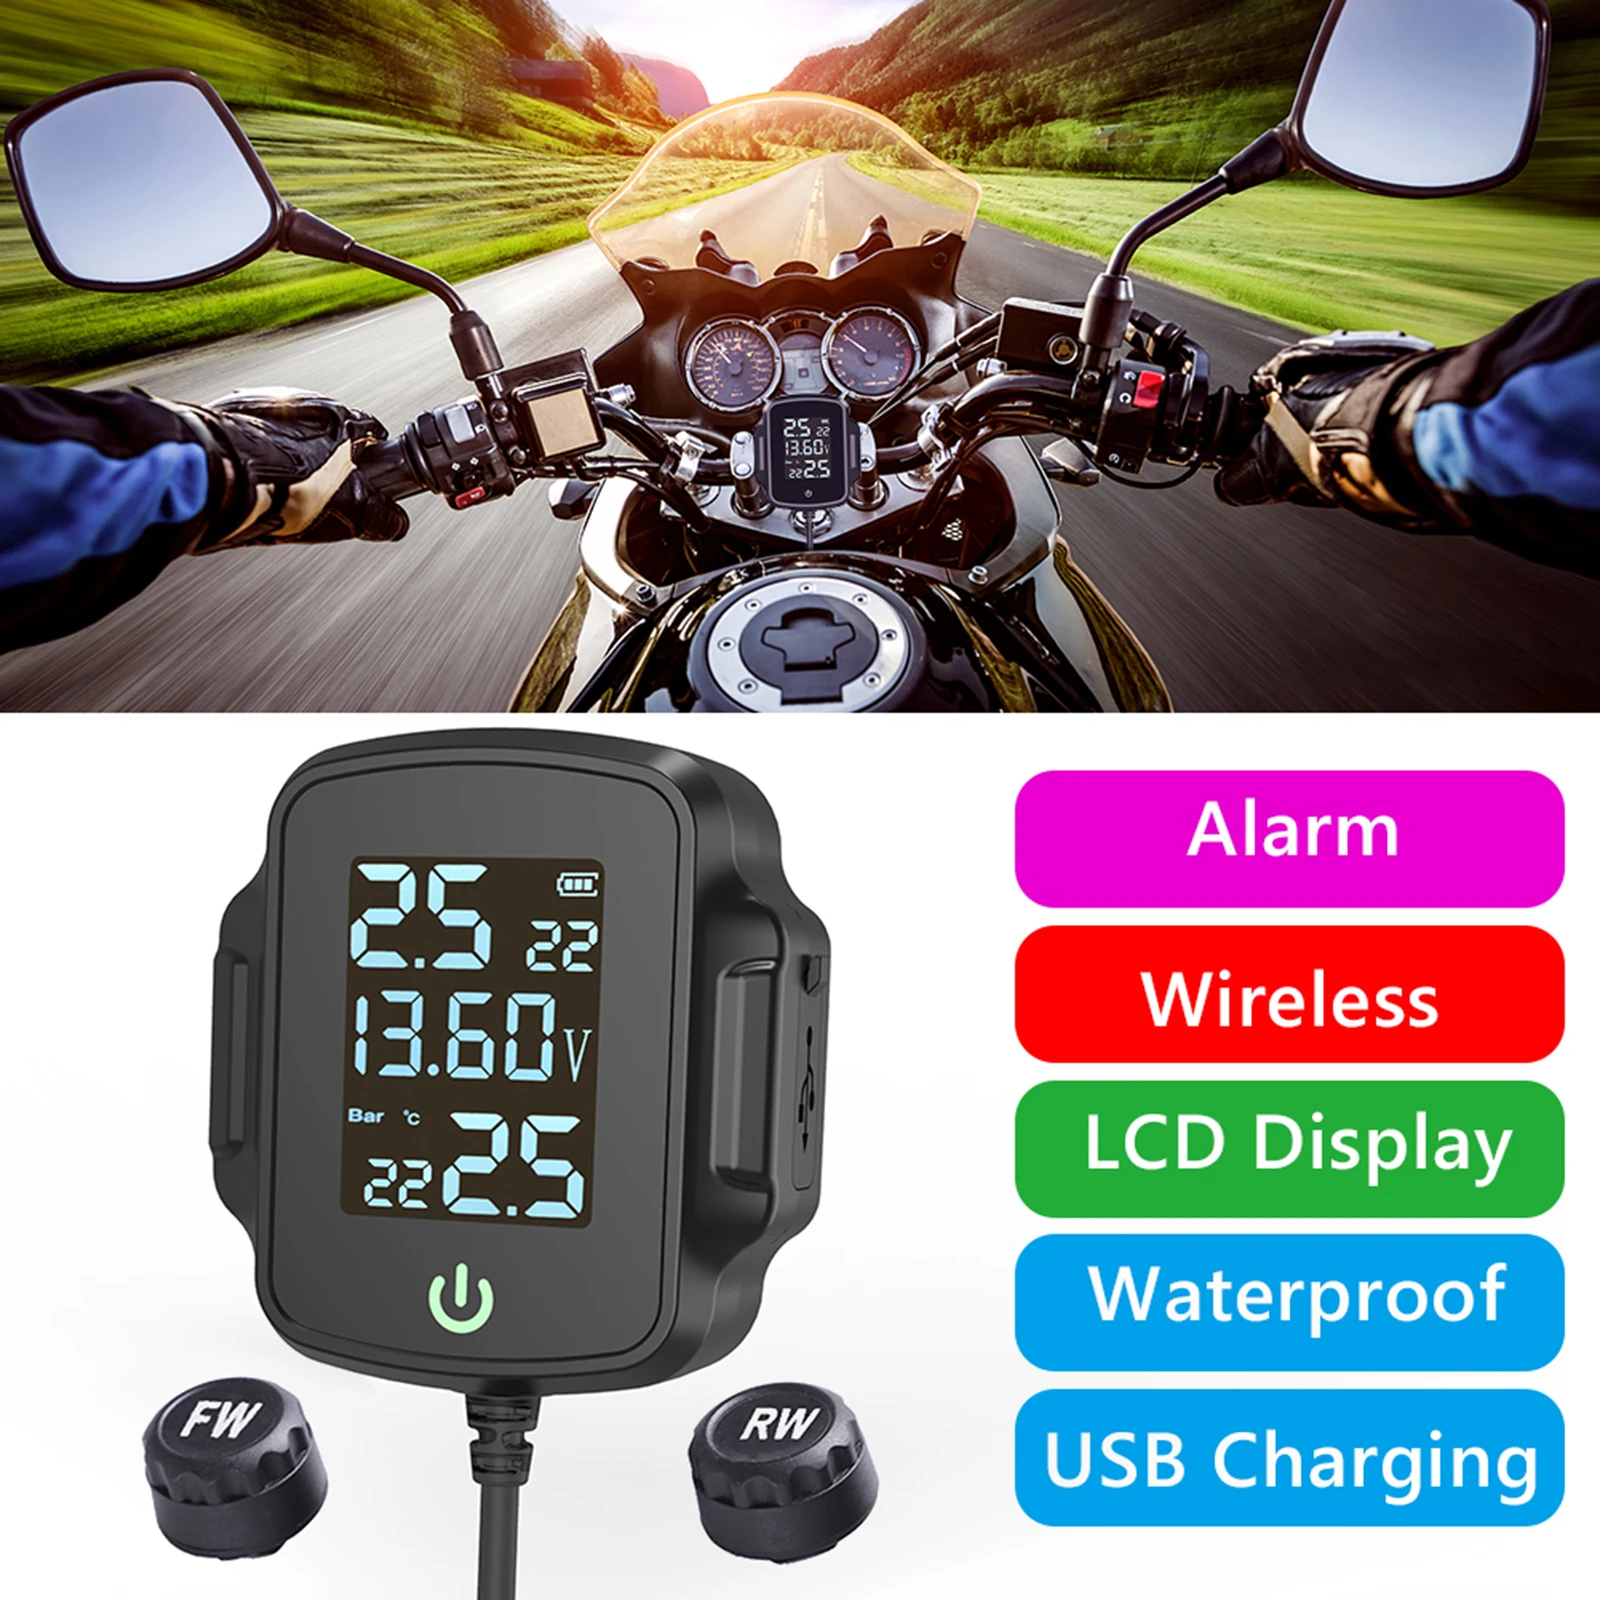 

Waterproof Digital Motorcycle TPMS Tire Pressure Monitoring System Durable Easy install with QC 3.0 USB Charger